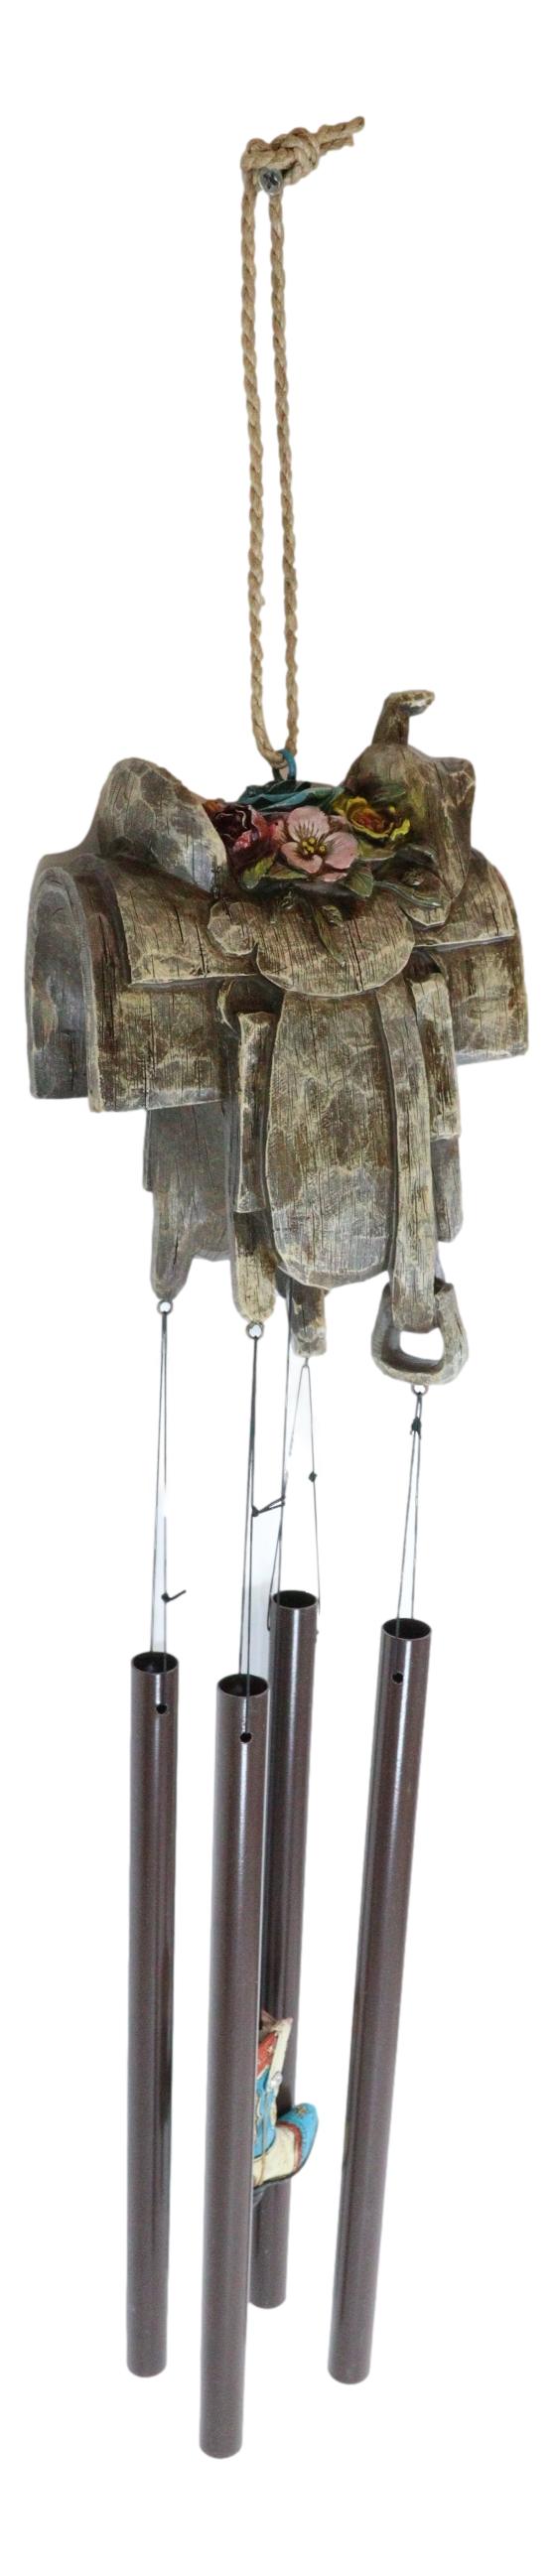 Western Country Rustic Floral Horse Saddle Cowboy Boot Decorative Wind Chime